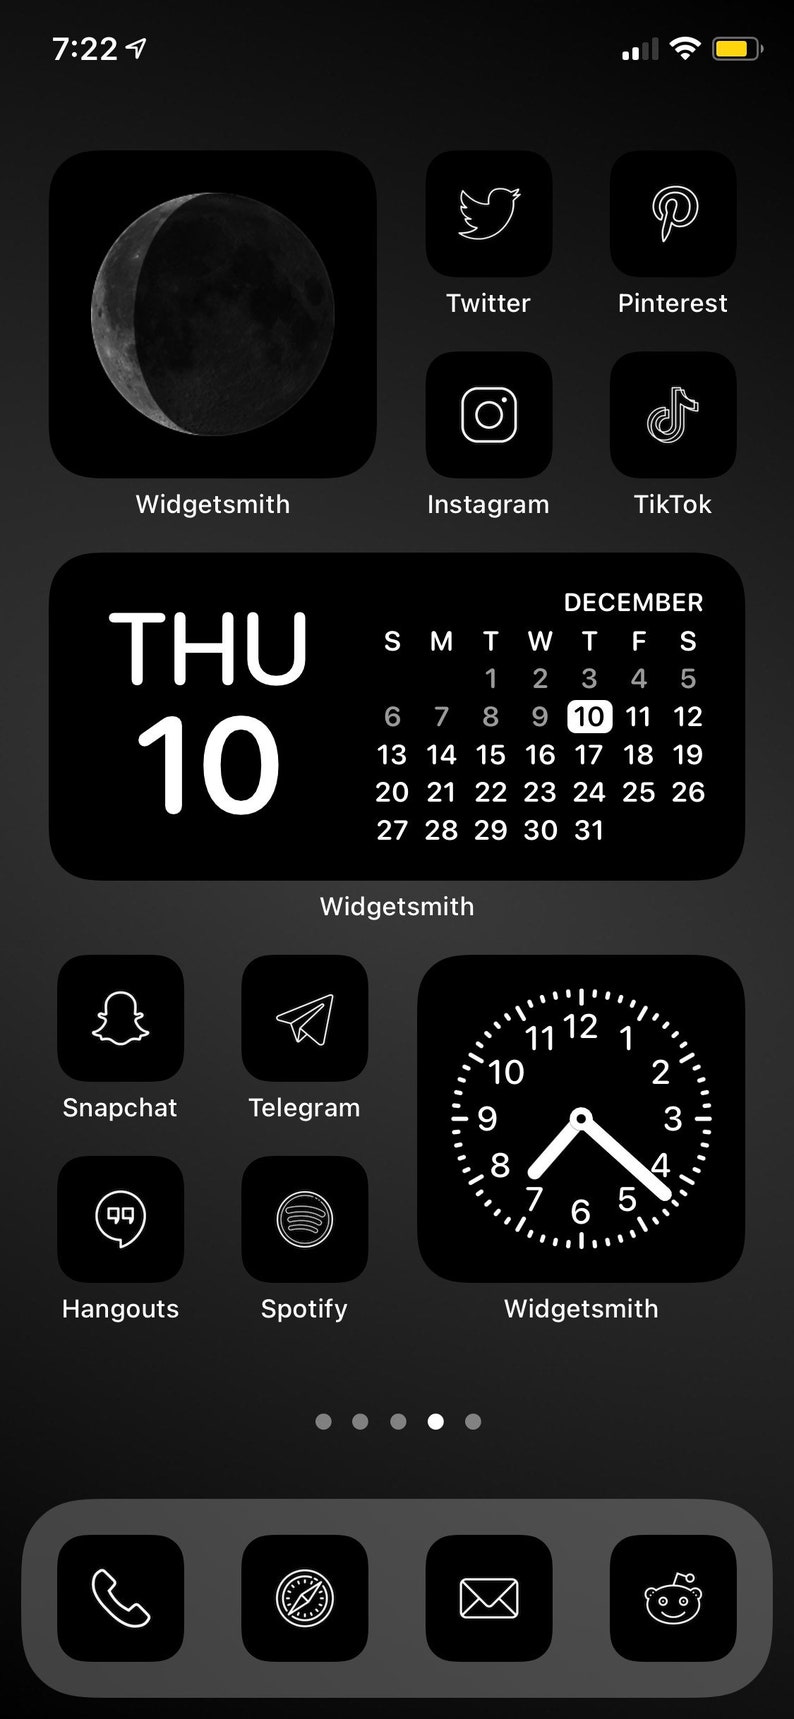 Minimal Charcoal Icon Aesthetic Pack Black and White App Icons IOS 14 Customize Home Screen Widget Smith Widgets Cove The Design image 9